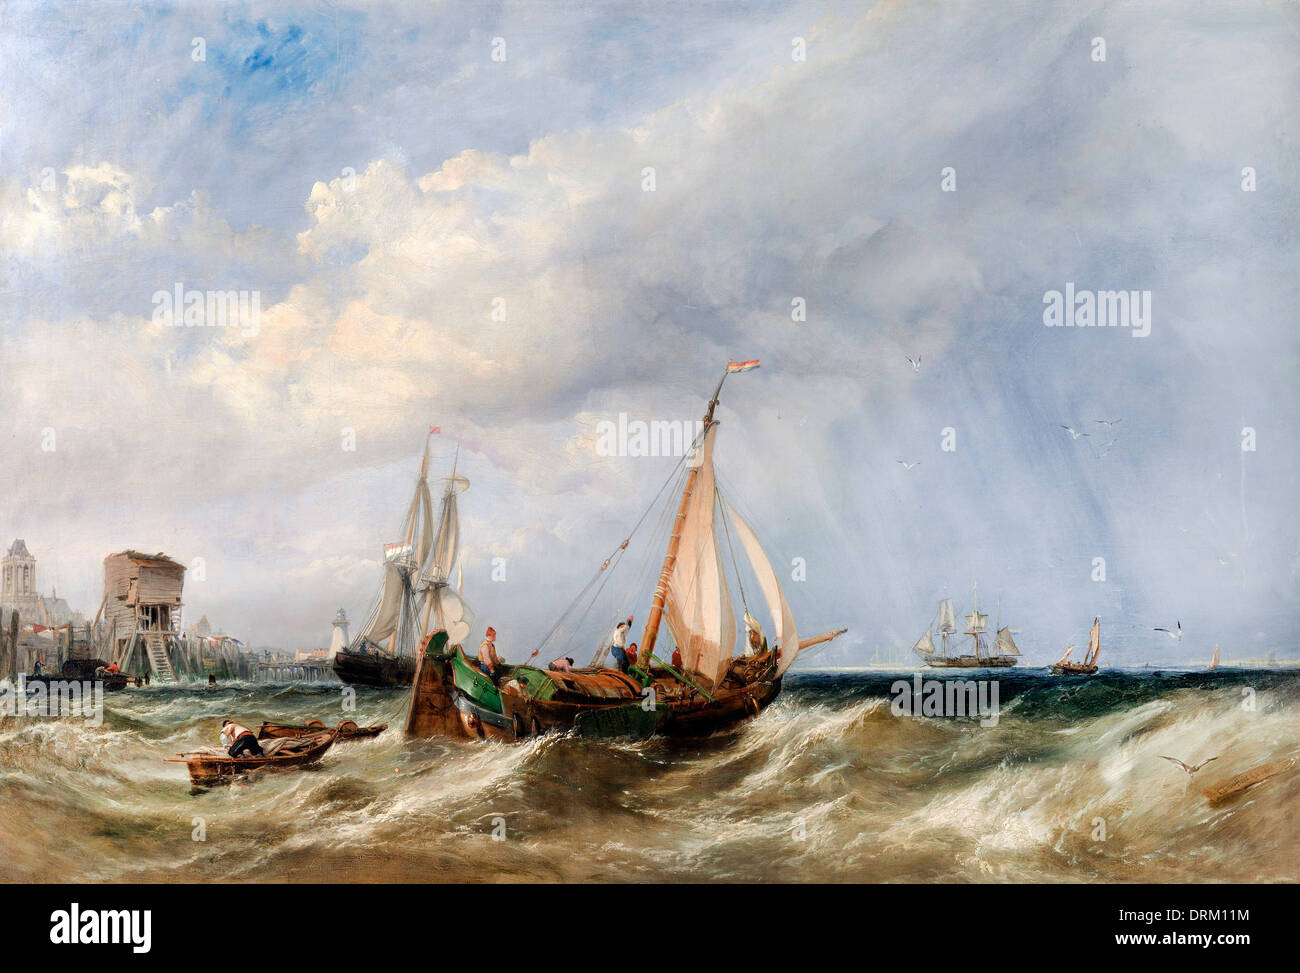 Clarkson Frederick Stanfield, A Dutch Barge and Merchantmen Running out of Rotterdam 1856 Oil on canvas. Stock Photo